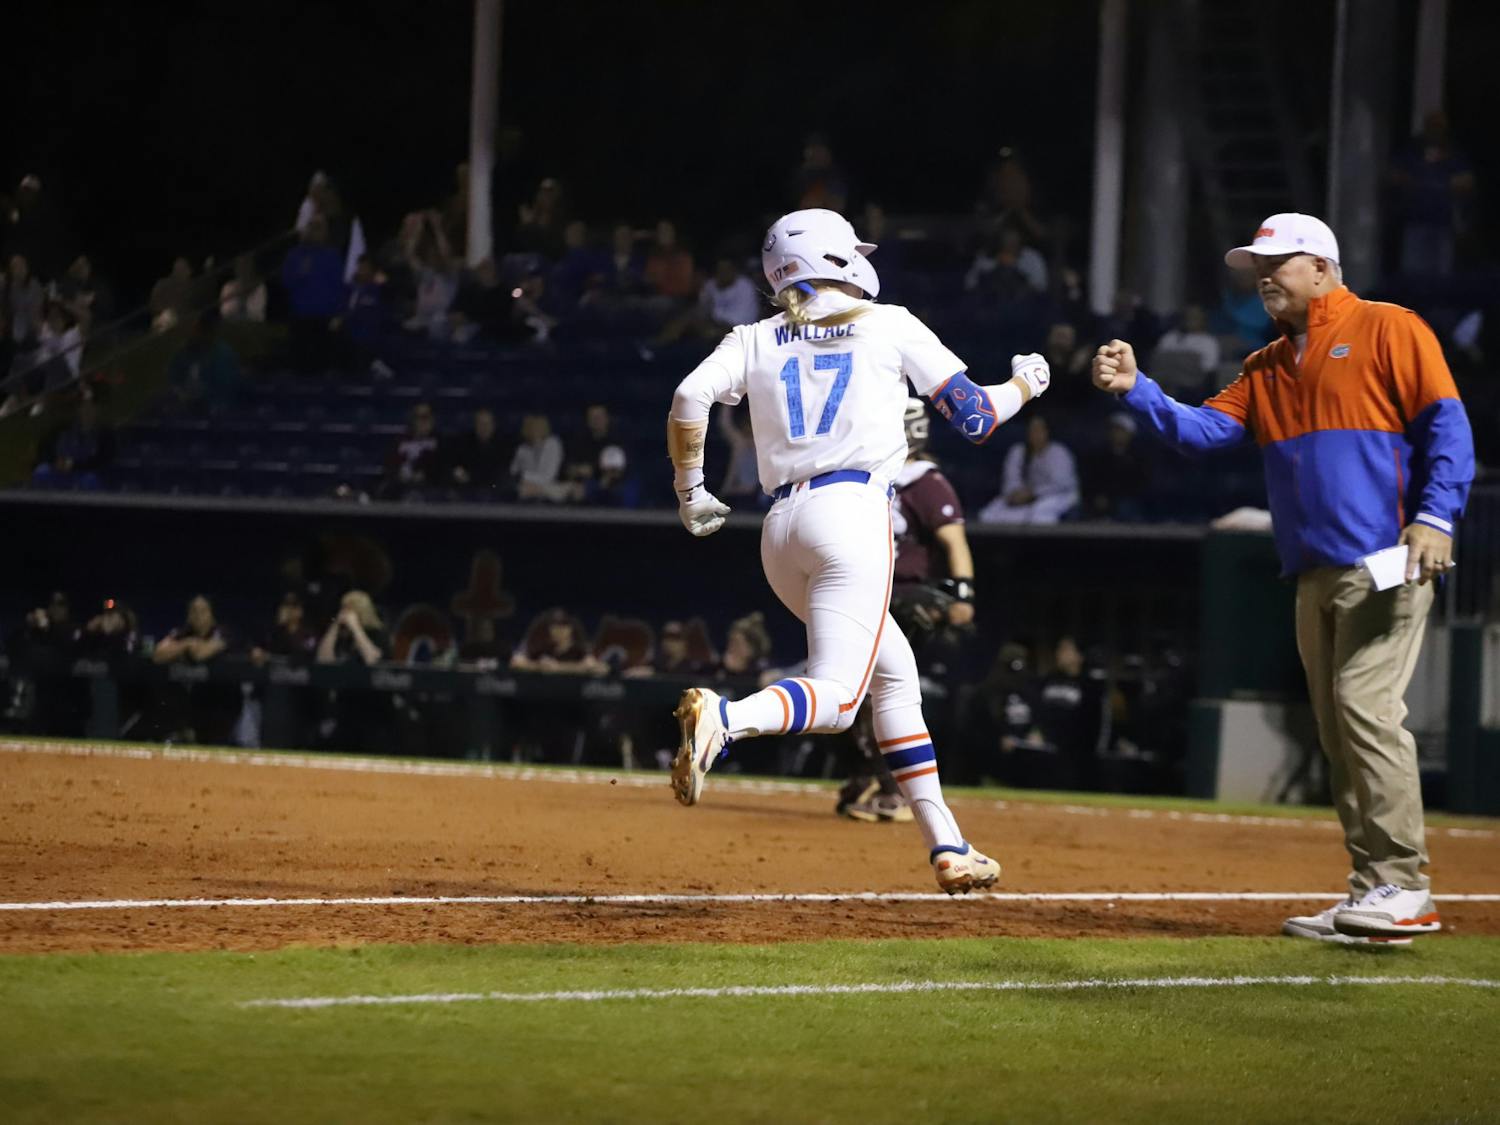 Redshirt junior Skylar Wallace rounds third after launching a home run to center field. Florida takes on conference rival Tennessee in a weekend series.